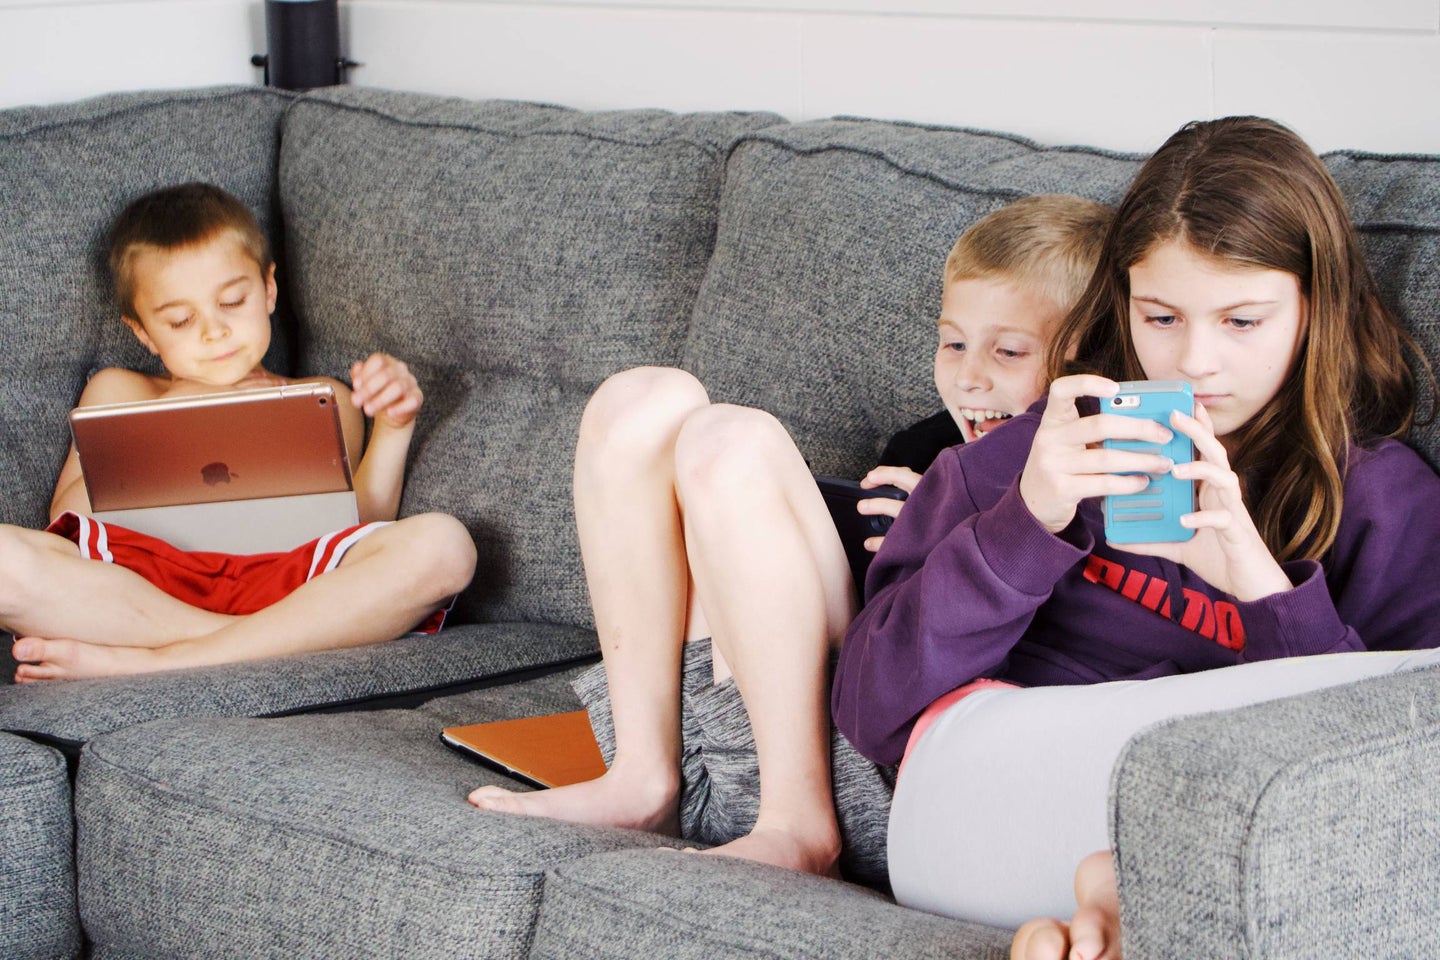 three kids on a couch looking at phones and tablets